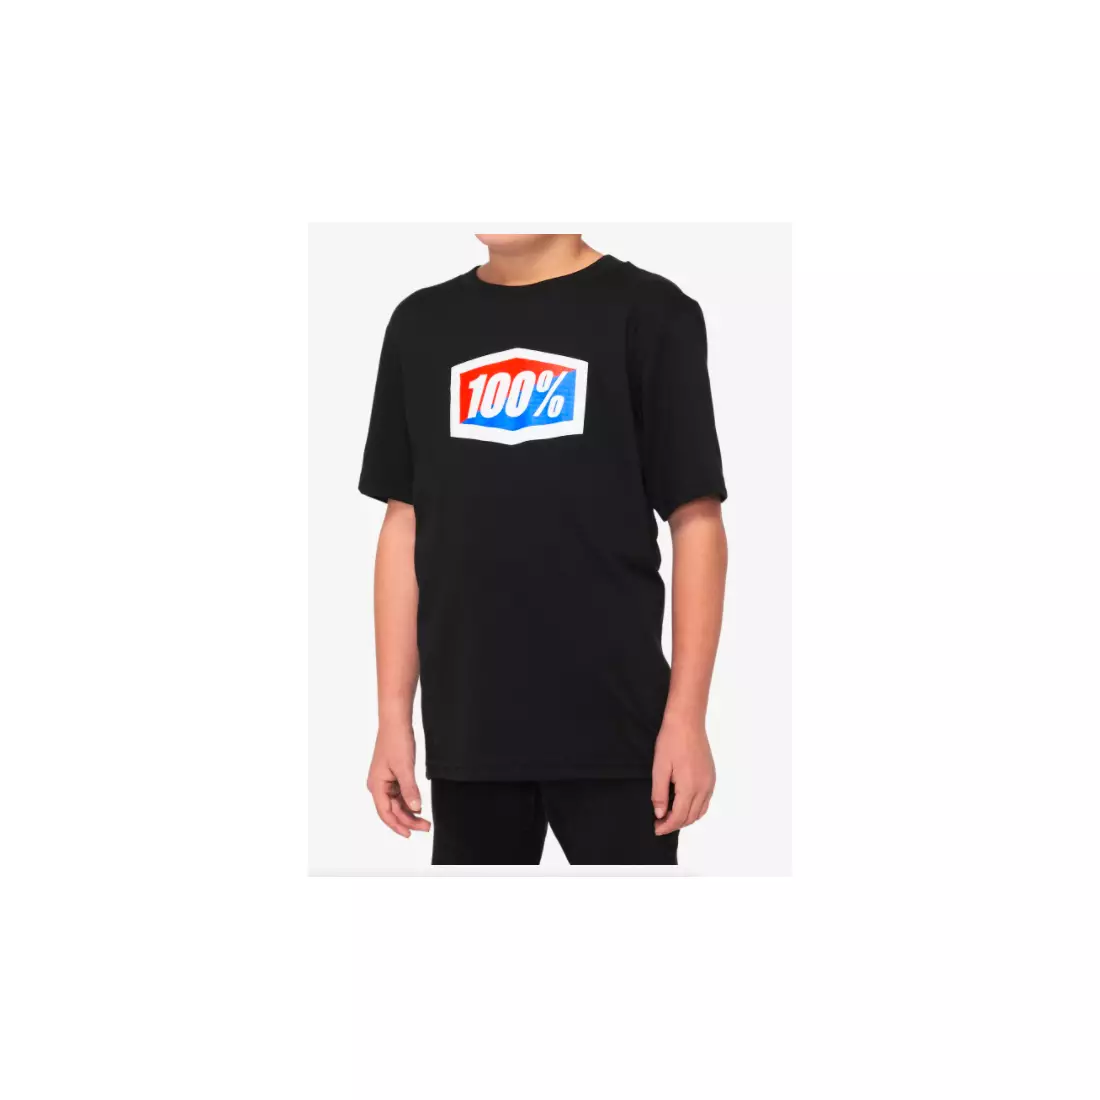 100% t-shirt with short sleeves STAMPS Youth black